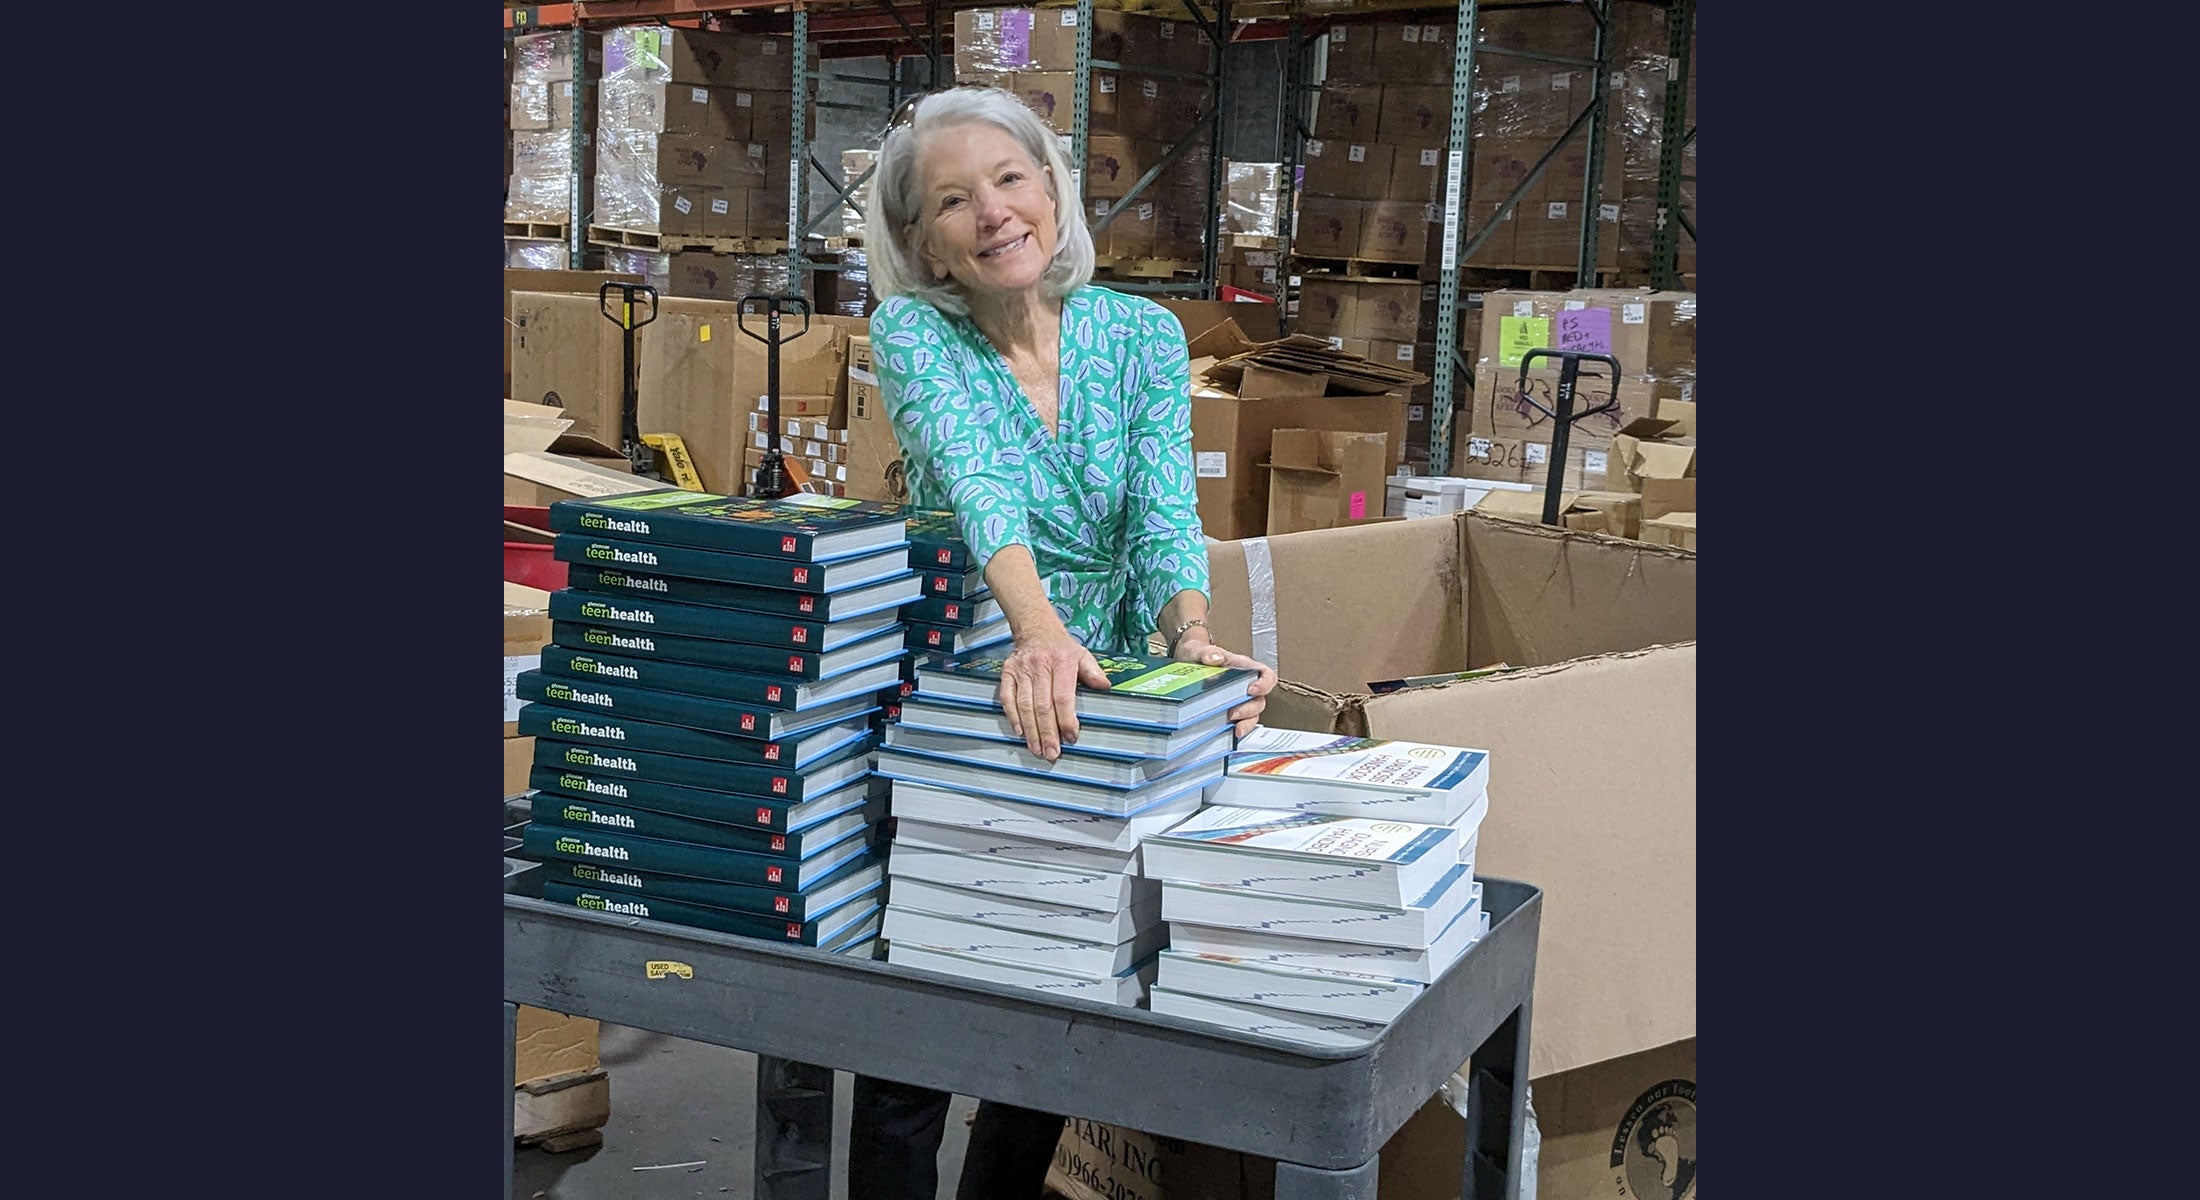 A CARE Women’s Network member organizing books for a Books for Africa event.